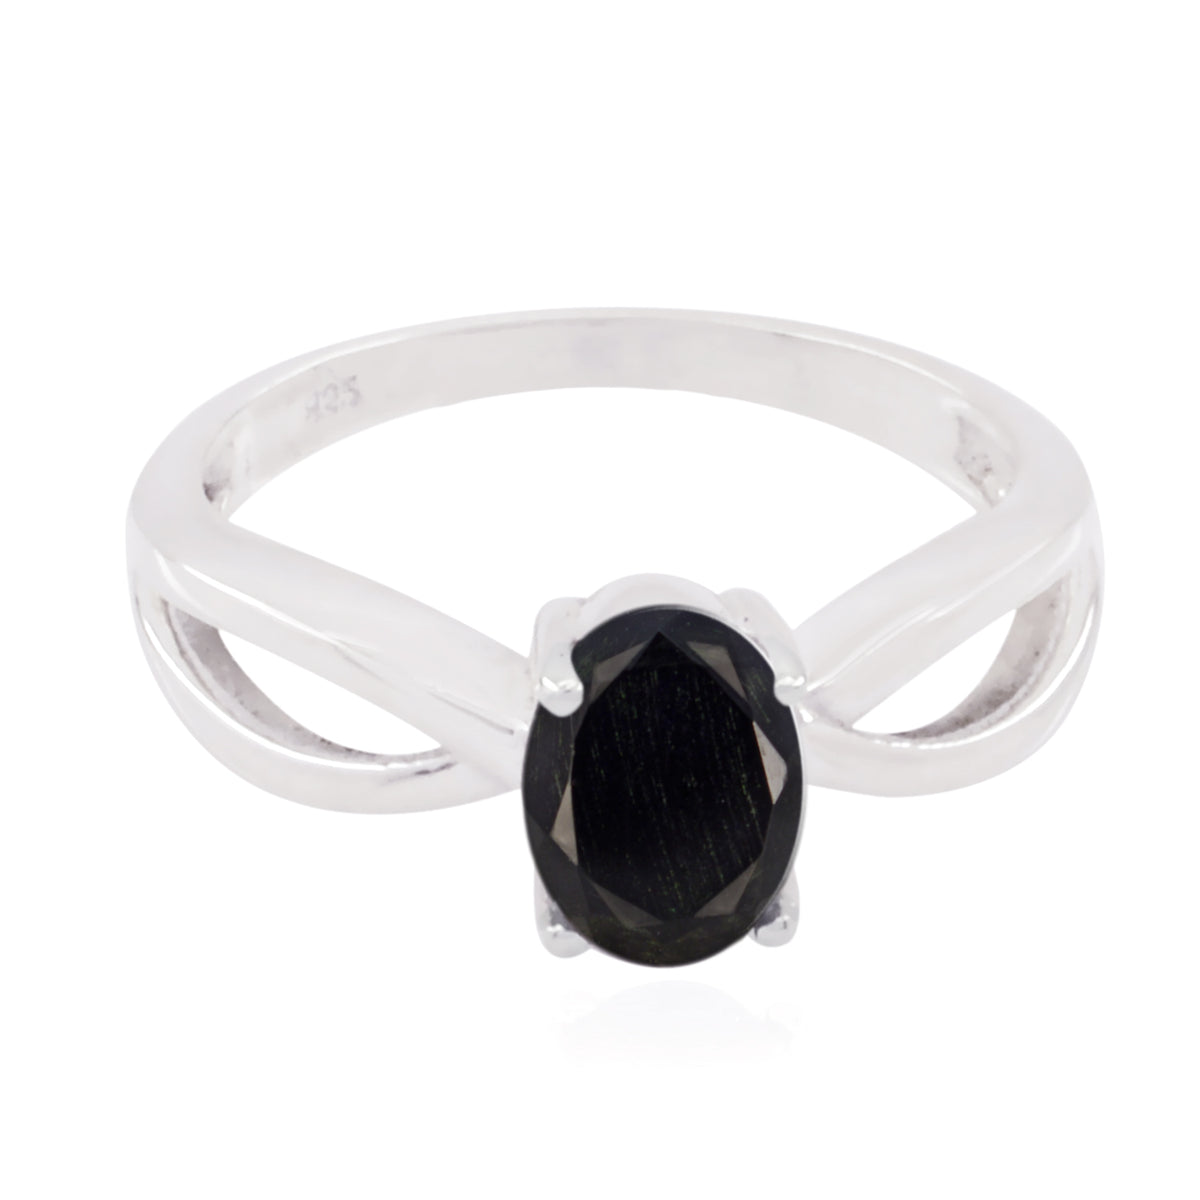 Attractive Gemstones Black Onyx 925 Sterling Silver Ring Home Décor